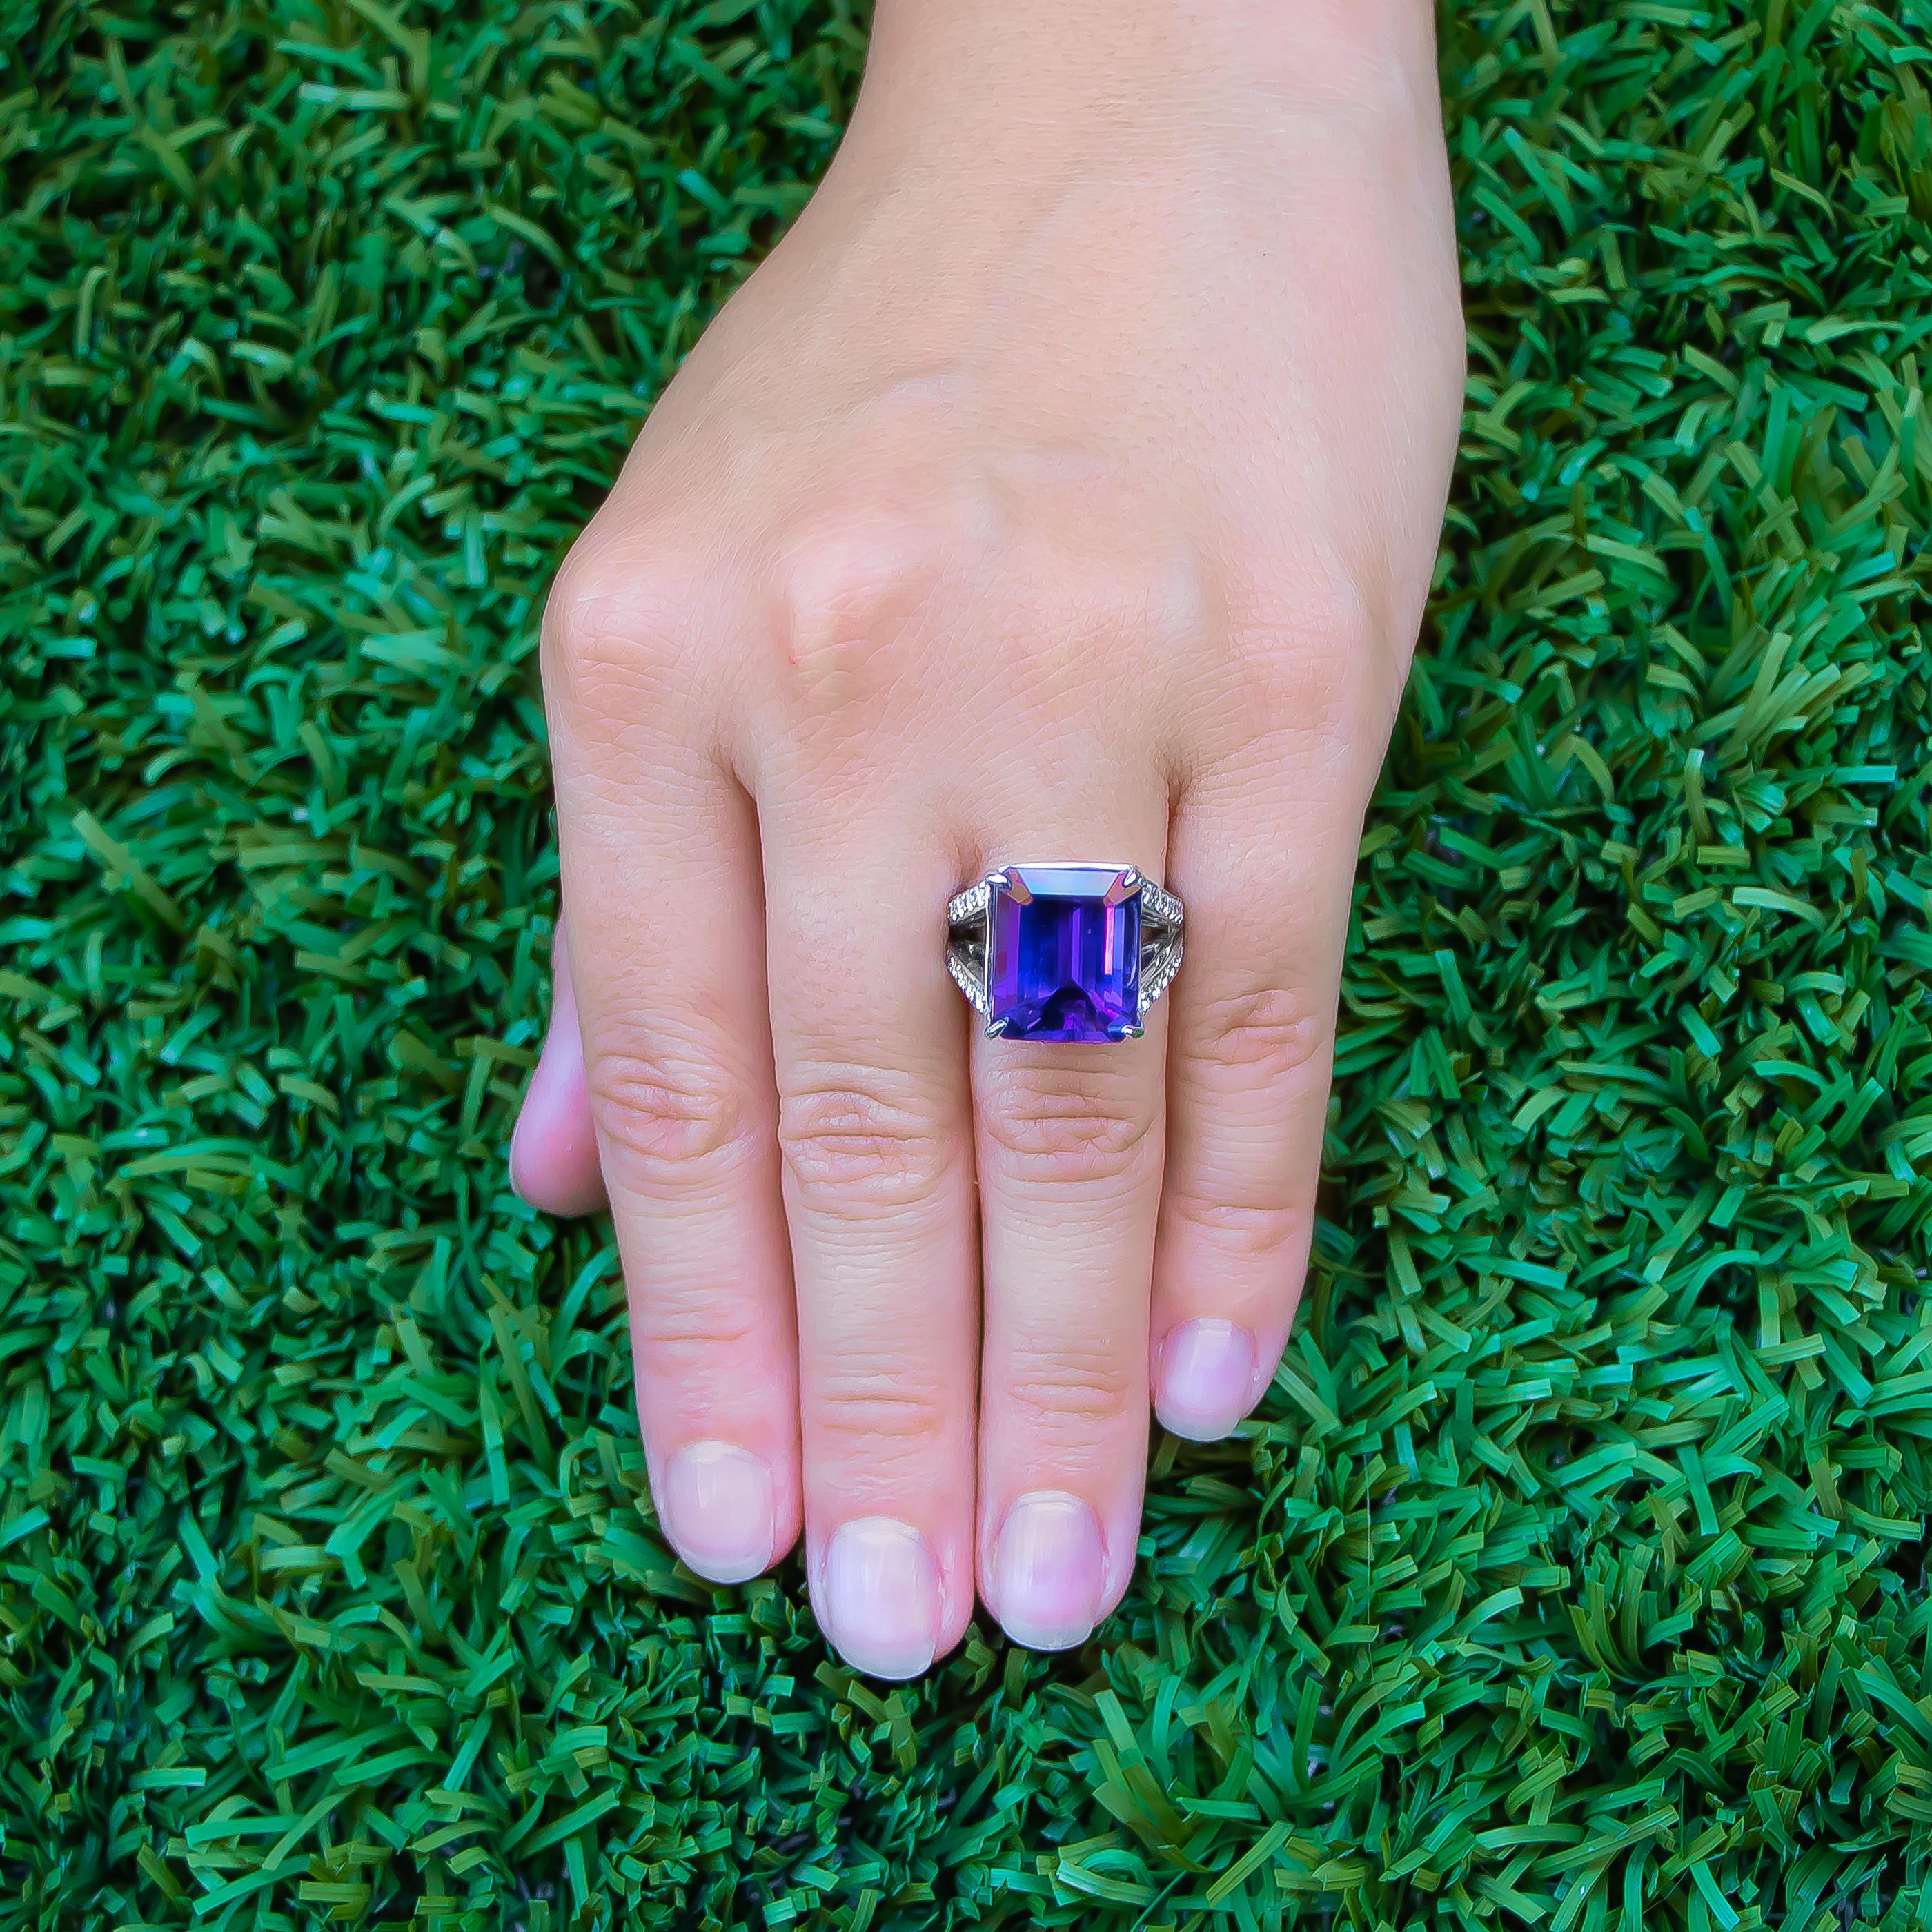 Very Fine Tanzanite = 17.67 carat
Diamonds = 1.46 carats
( Color: F, Clarity: VS )
Metal = 18K White Gold
Ring Size = 7
Complimentary Resizing Available
Jewelry Gift Box Included